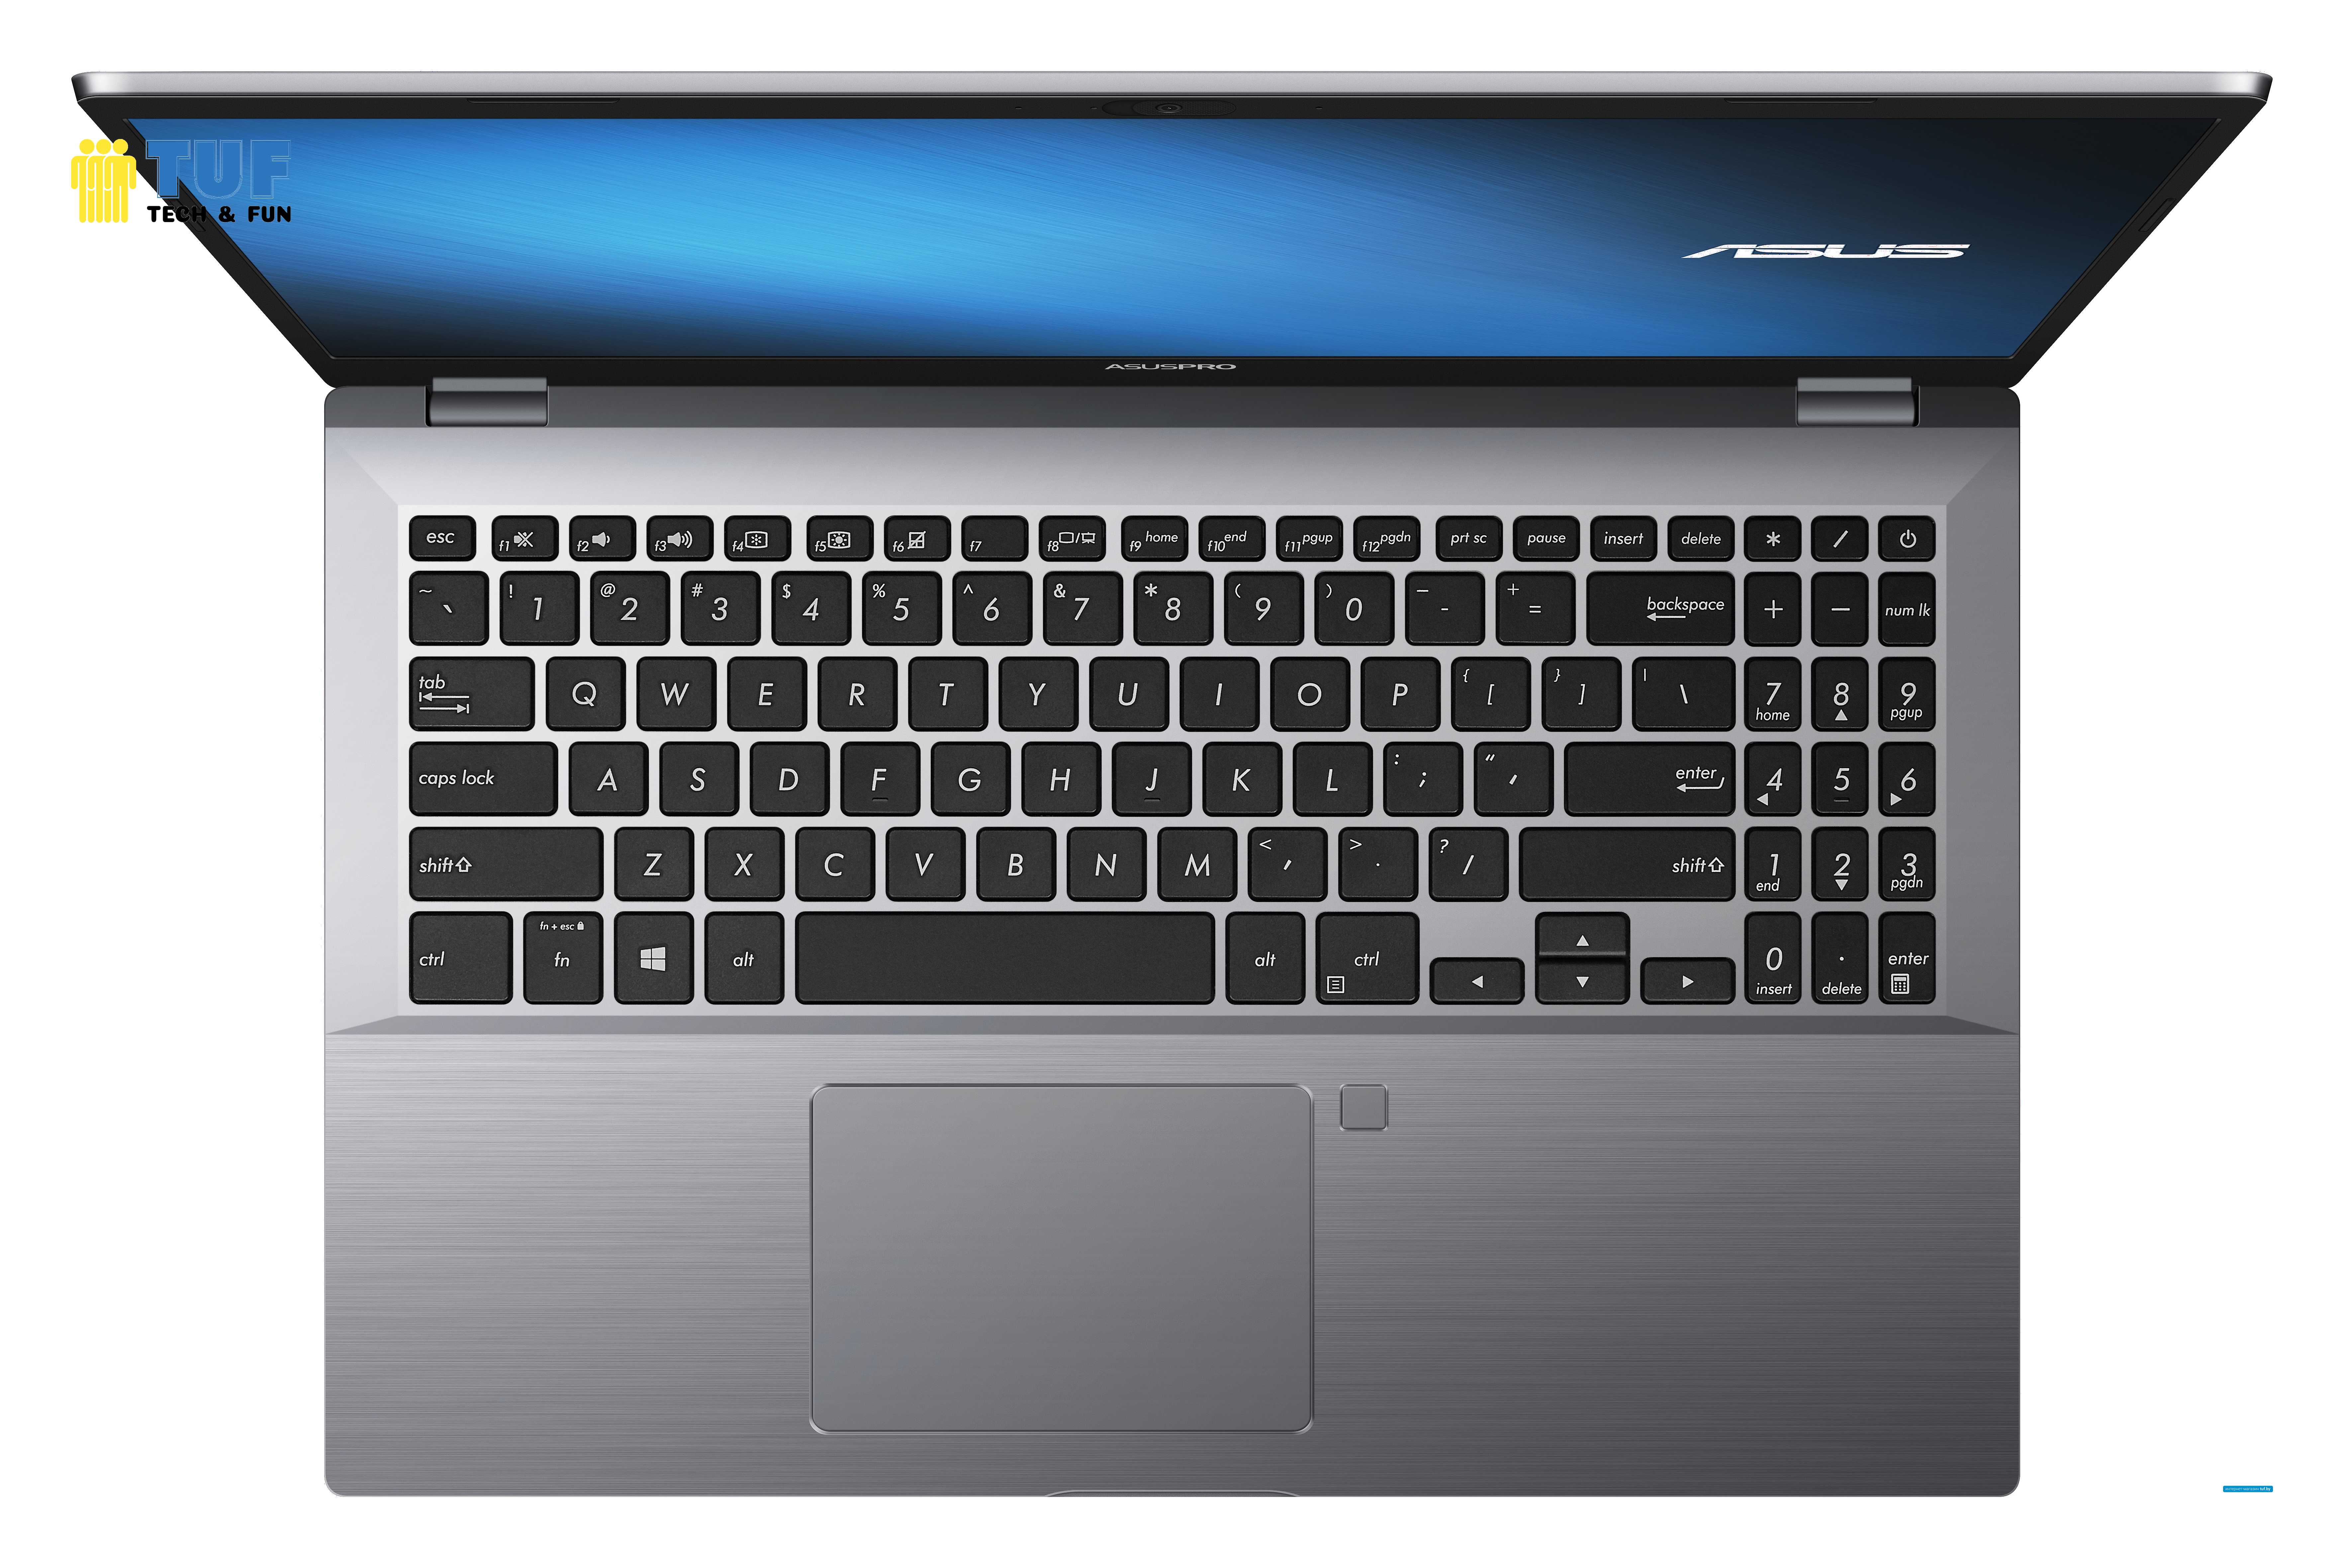 Ноутбук ASUS ASUSPro P3540FA-BR1381T